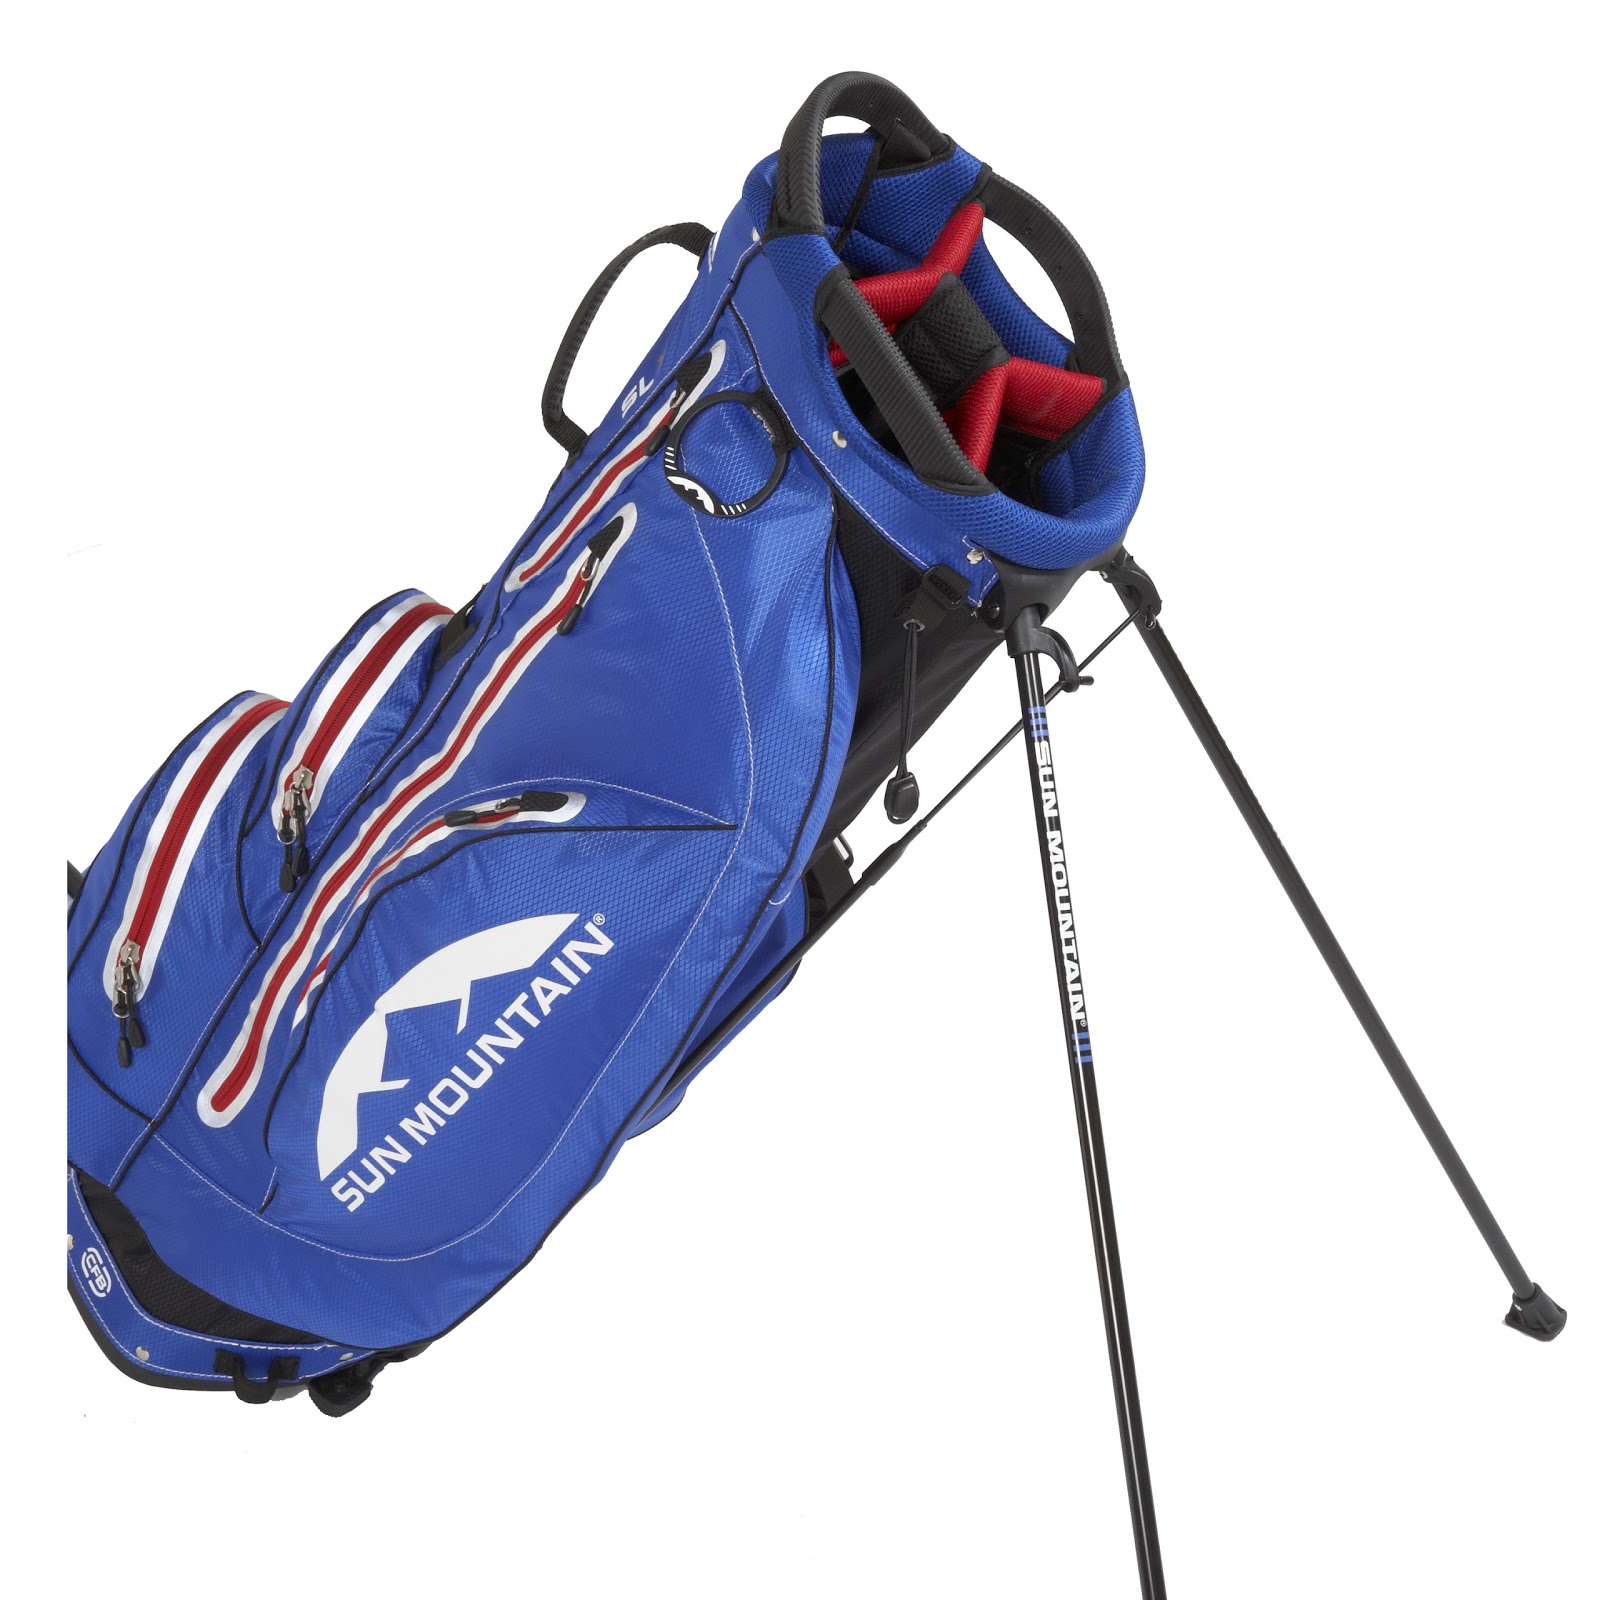 American Golfer: Report shows Sun Mountain best selling golf bag